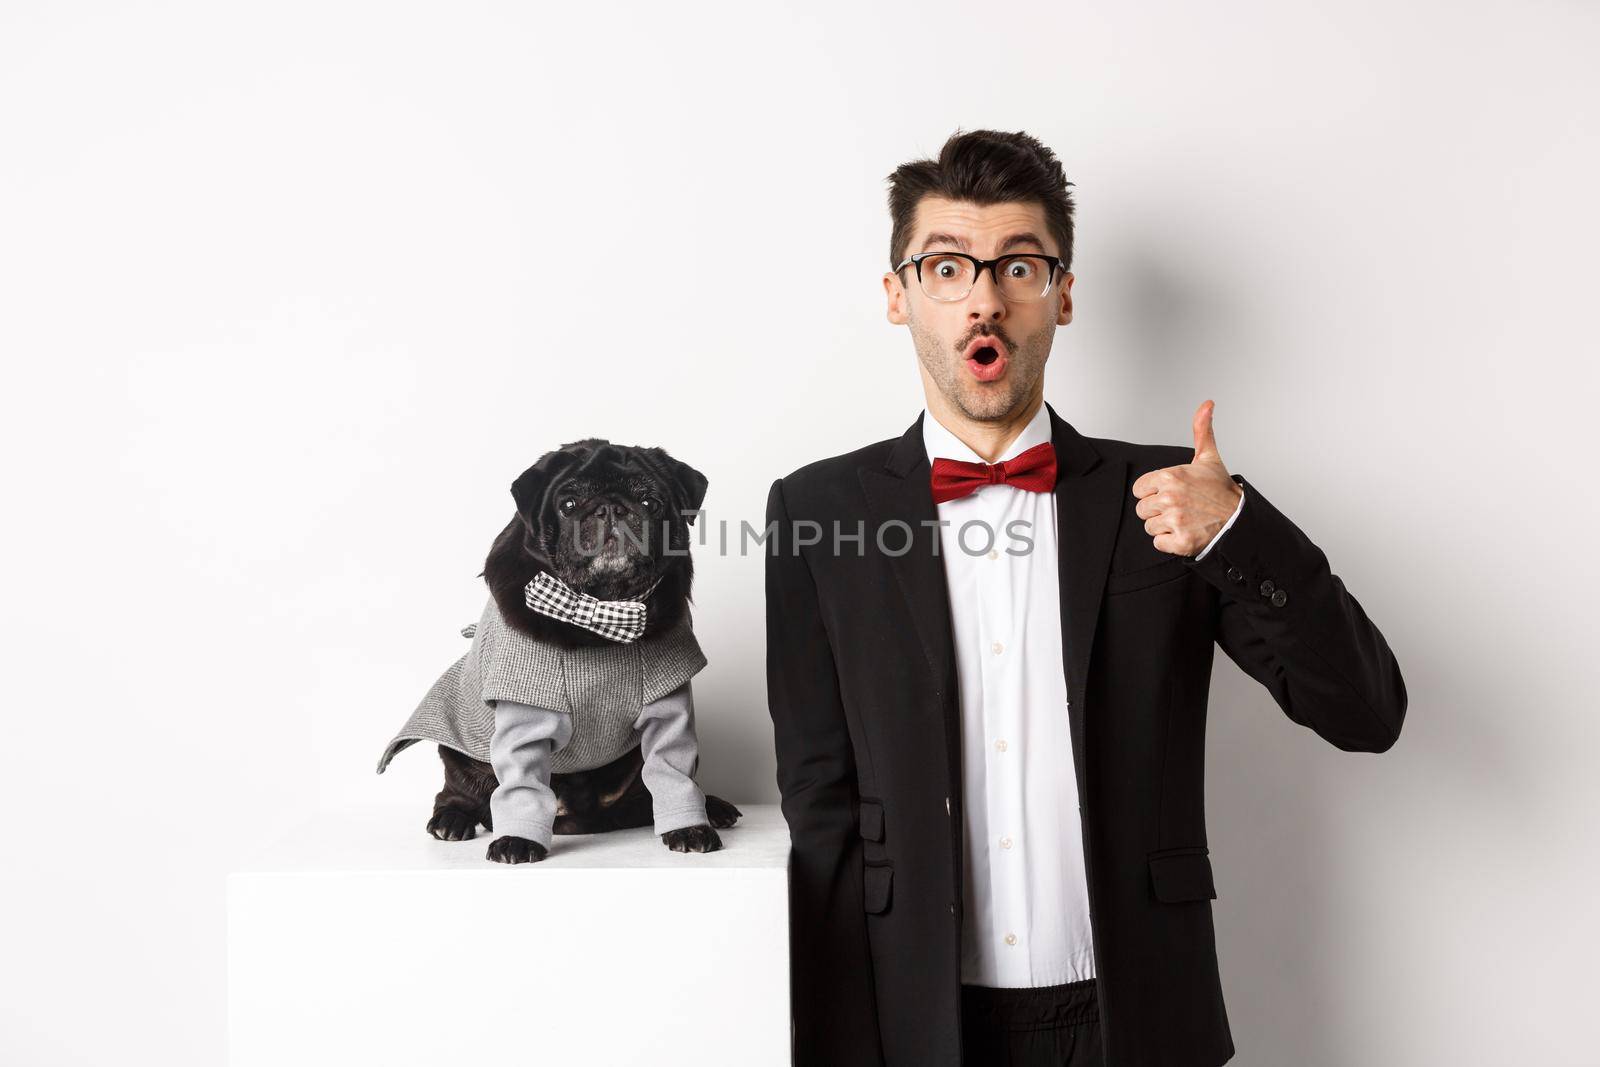 Animals, party and celebration concept. Handsome young man in suit and cute black pug in costume staring at camera, owner showing thumb up in approval and praise, white background.